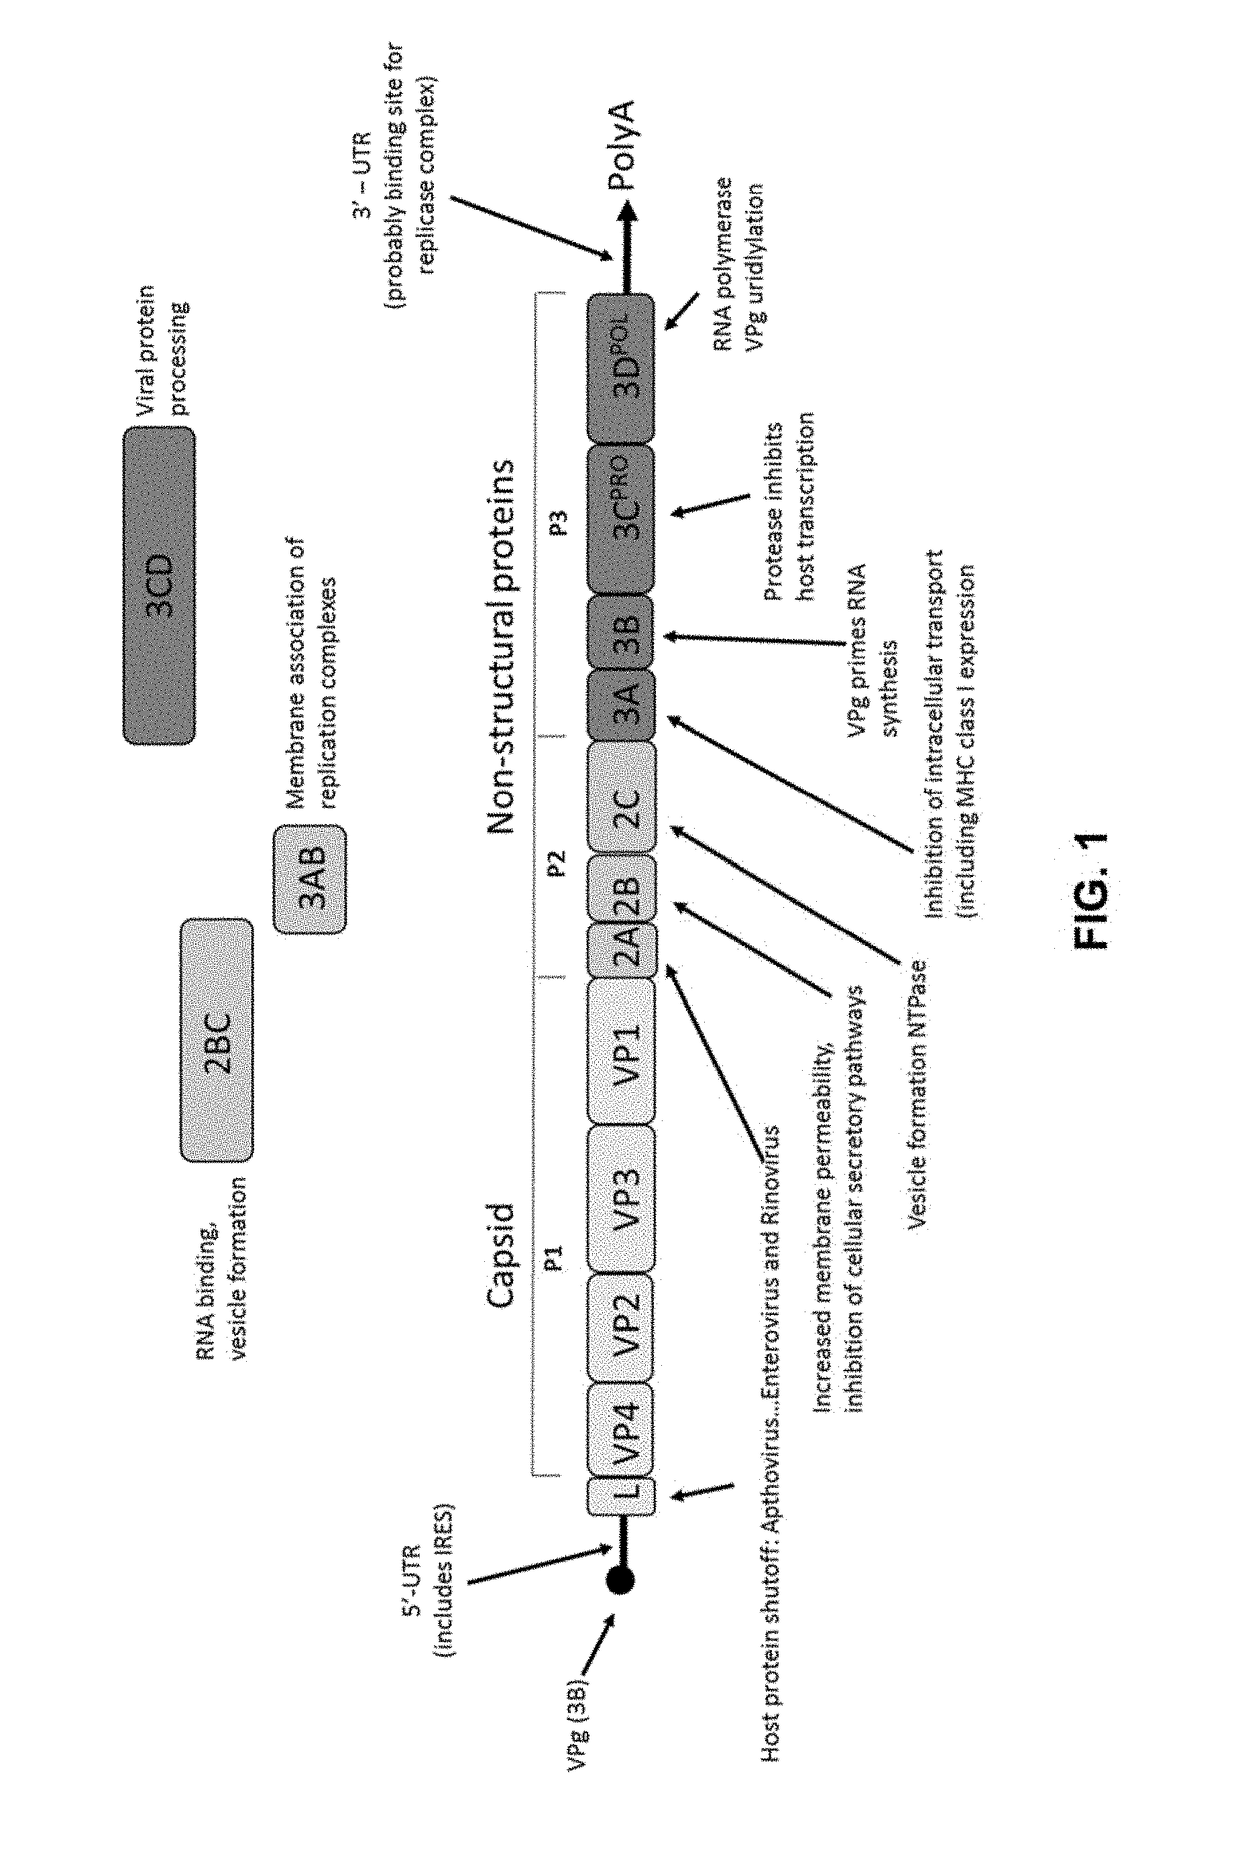 Methods of making and using vaccines utilizing minicircle DNA expression vectors for production of foot-and-mouth-disease virus proteins and virus-like particles